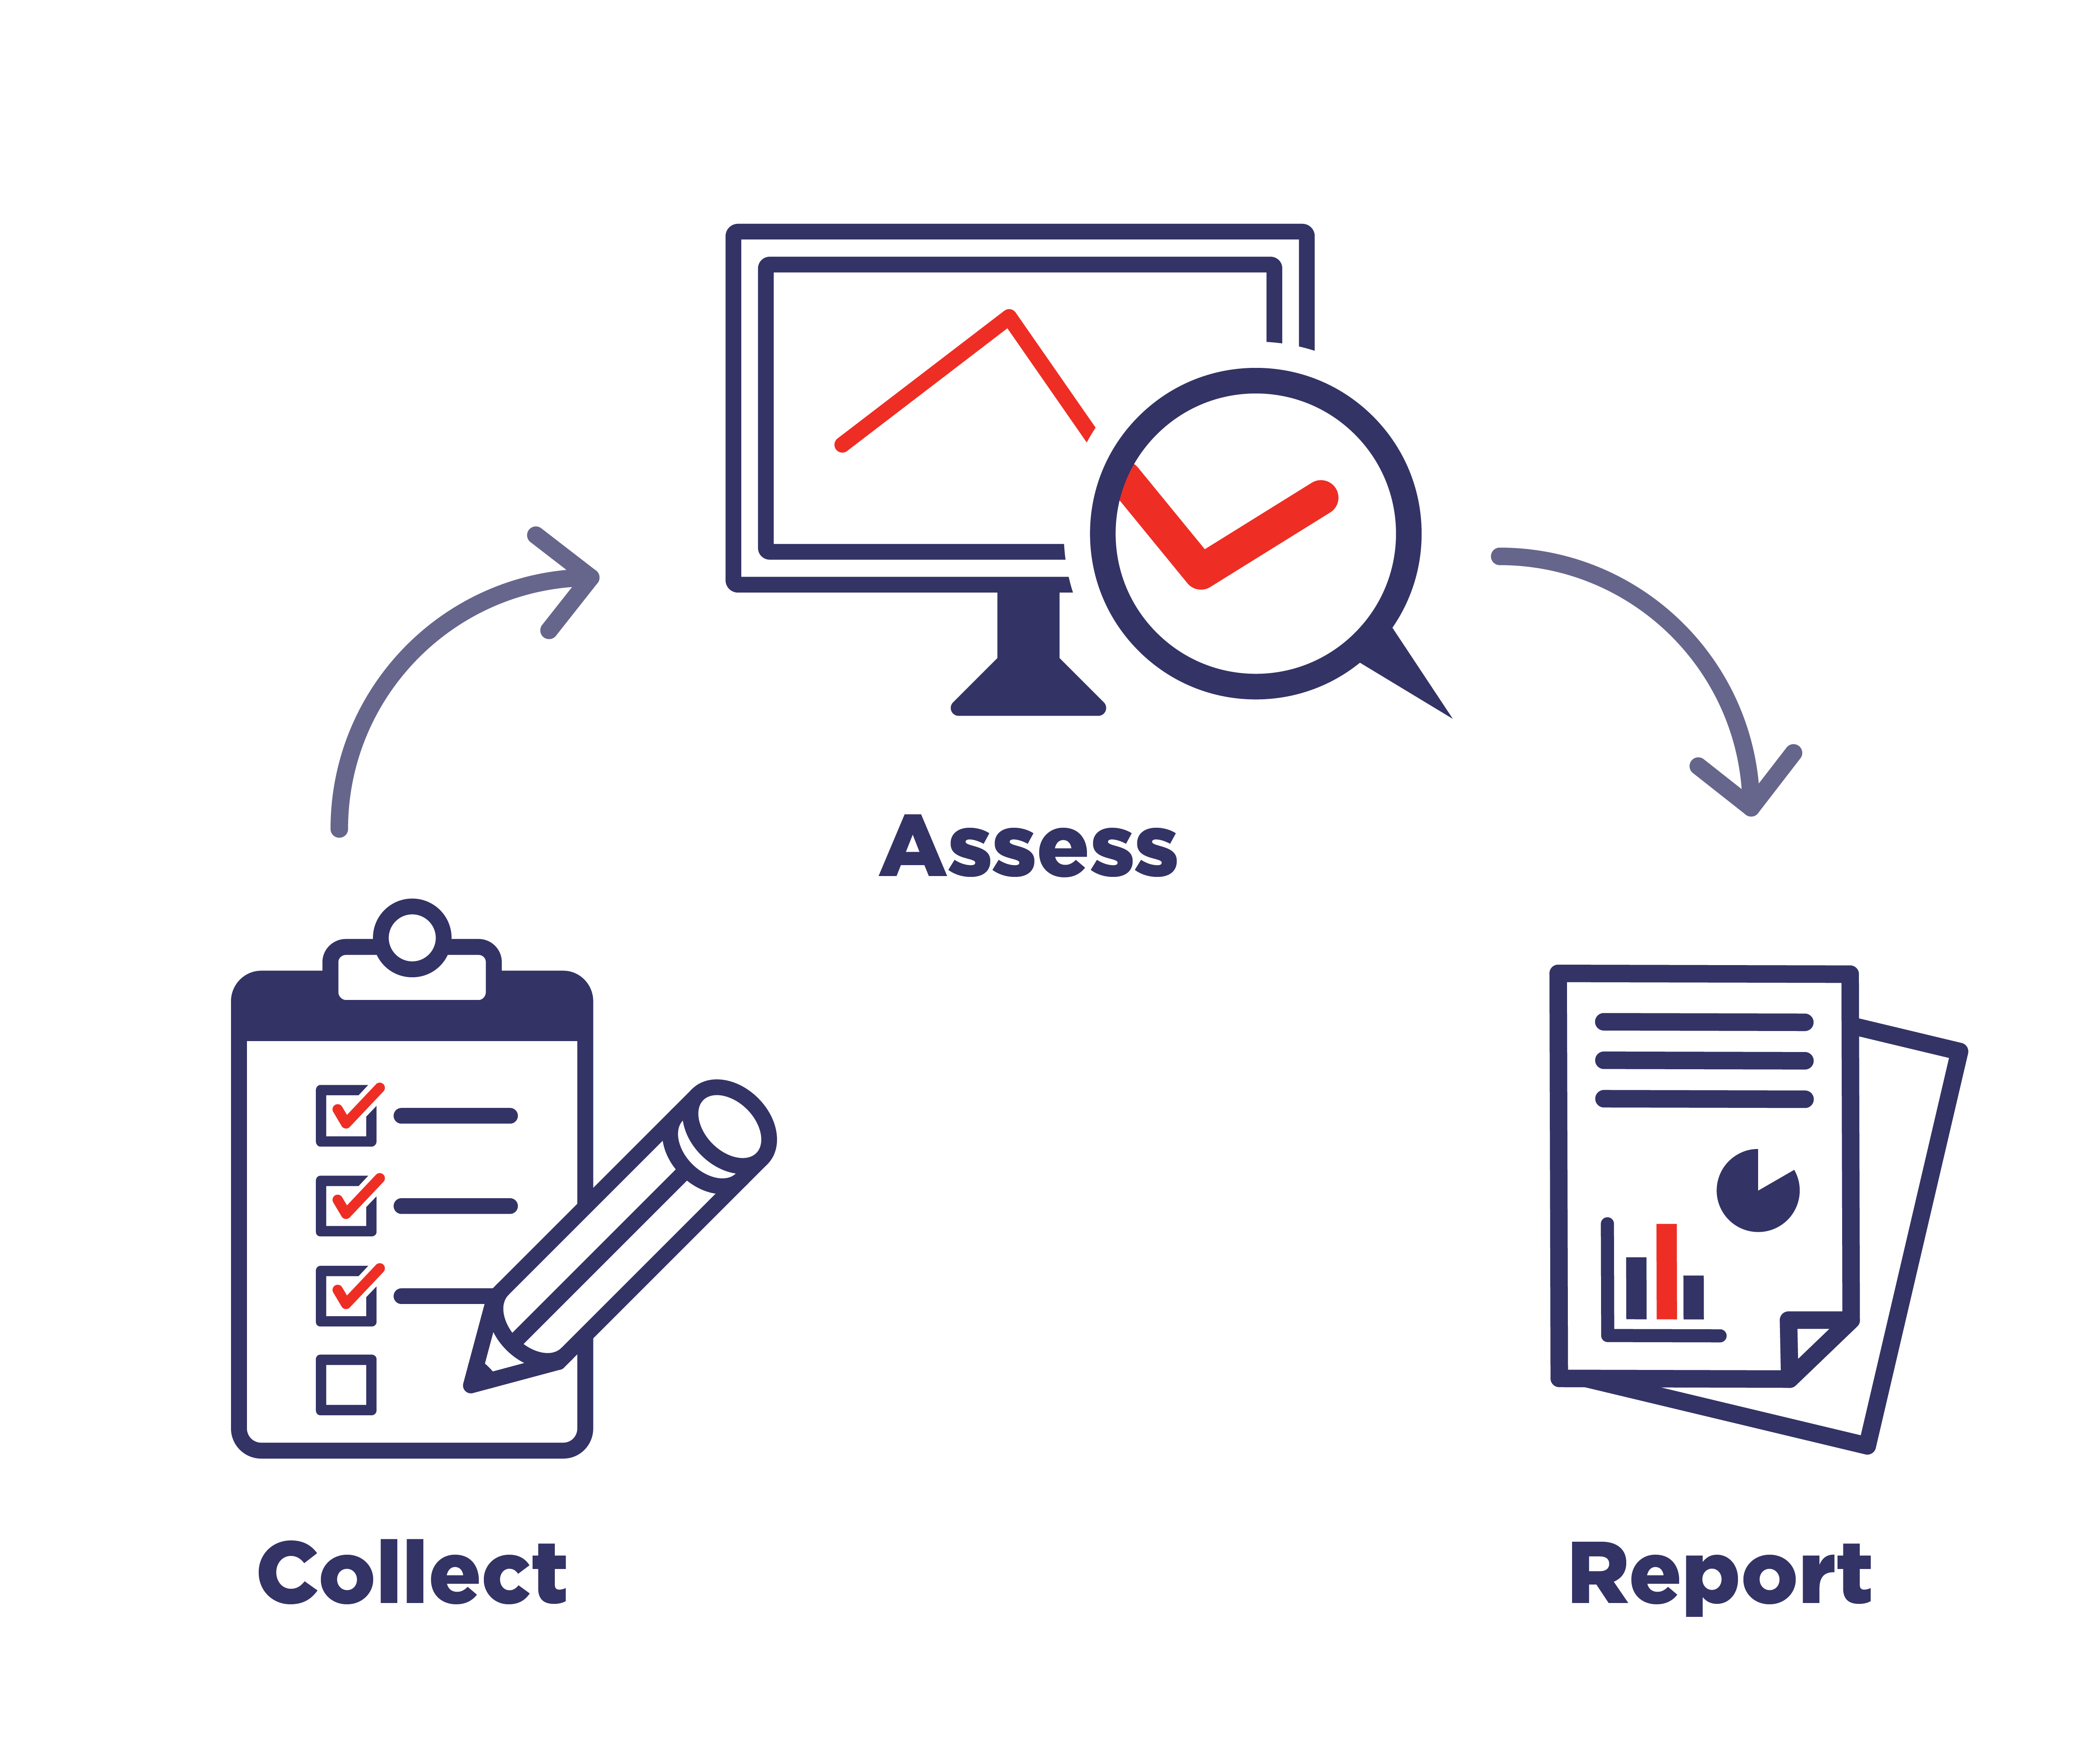 Icons depicting a three-step process for collecting, assessing and reporting.